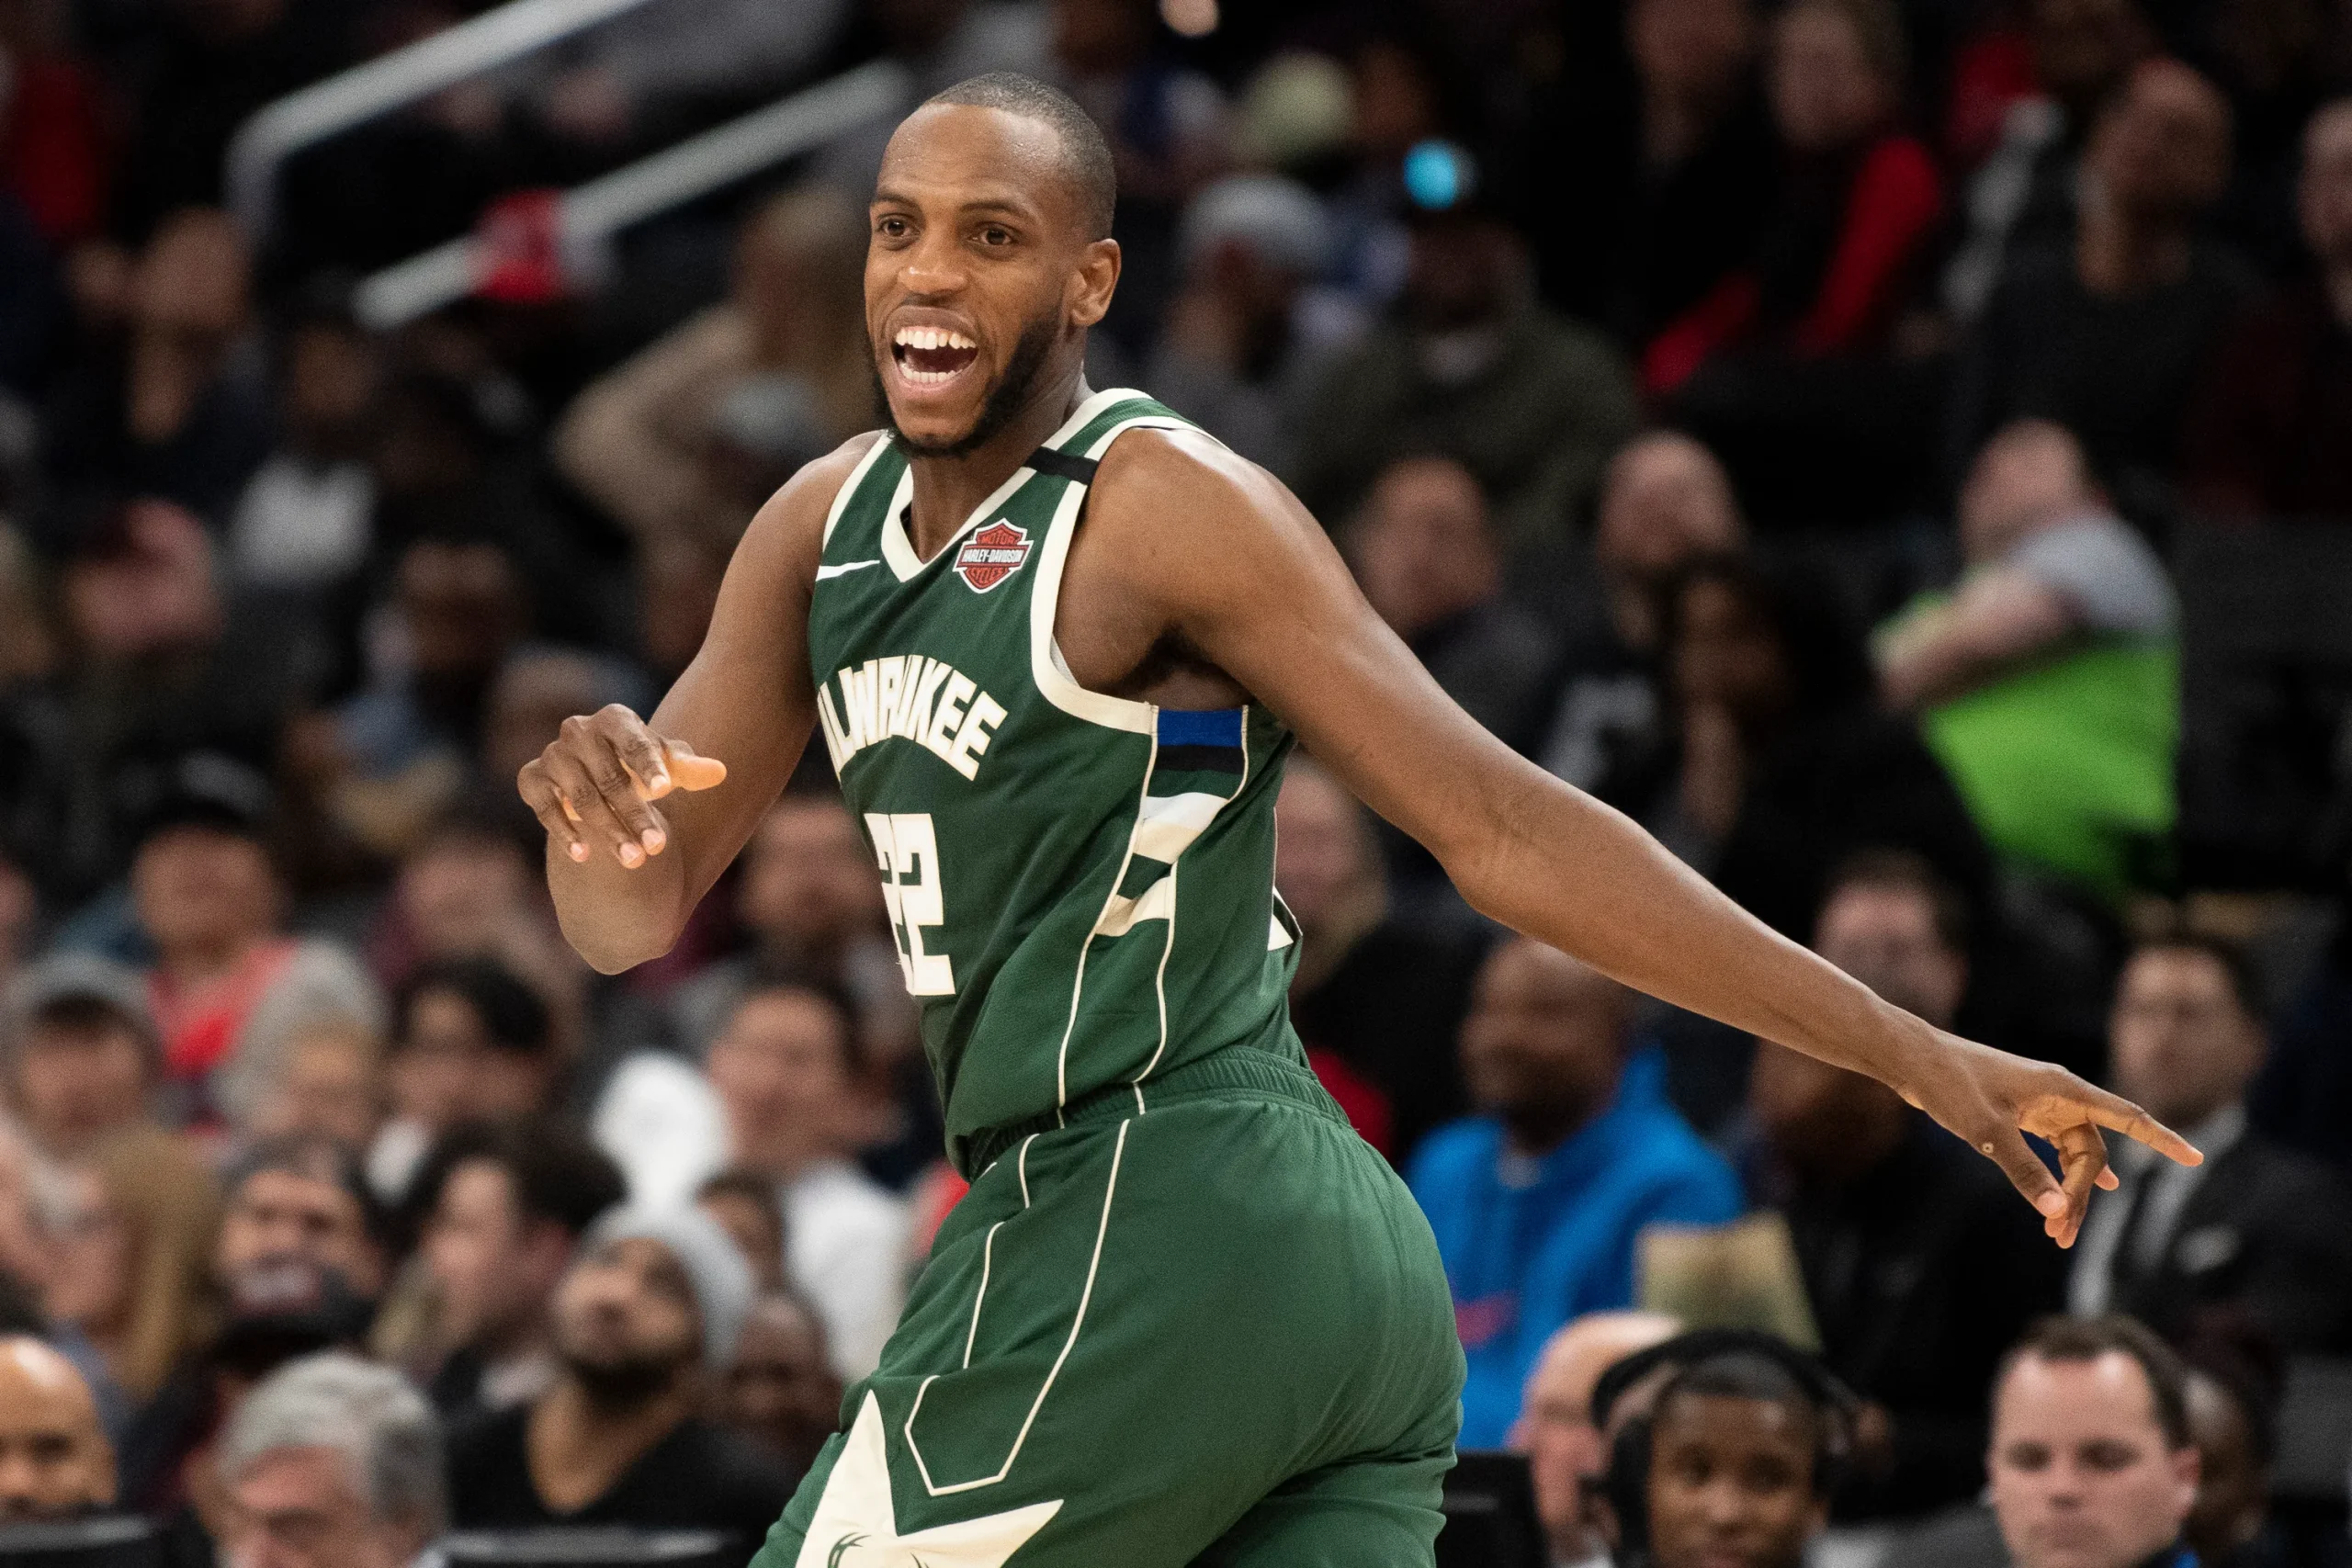 NBA News: Is Khris Middleton Playing Tonight vs Rockets? Giannis Antetokounmpo Expected to Do Heavy Lifting Yet Again